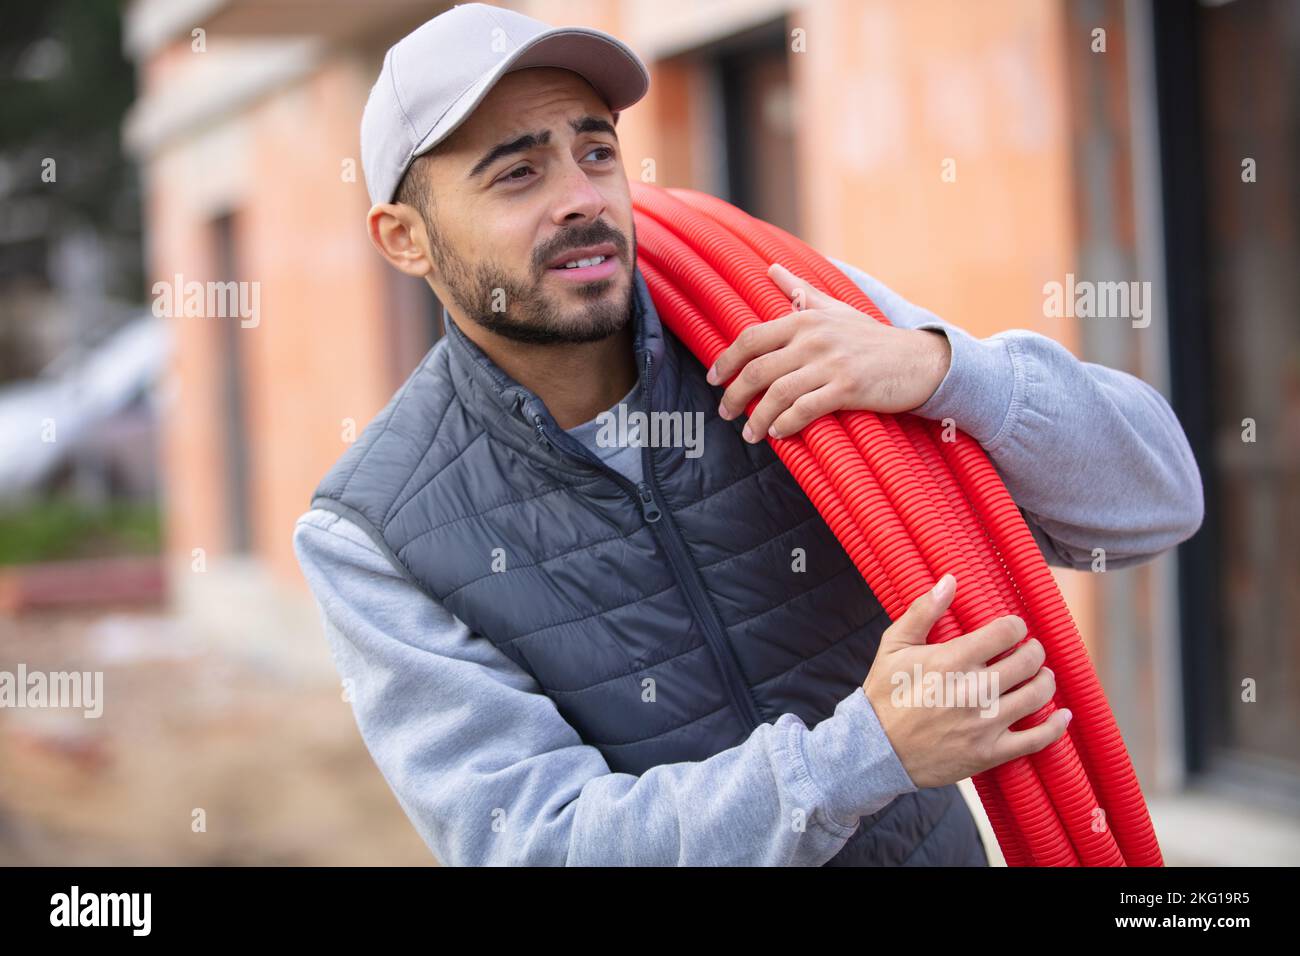 portrait of a smiling worker carrying corrugated conduit Stock Photo